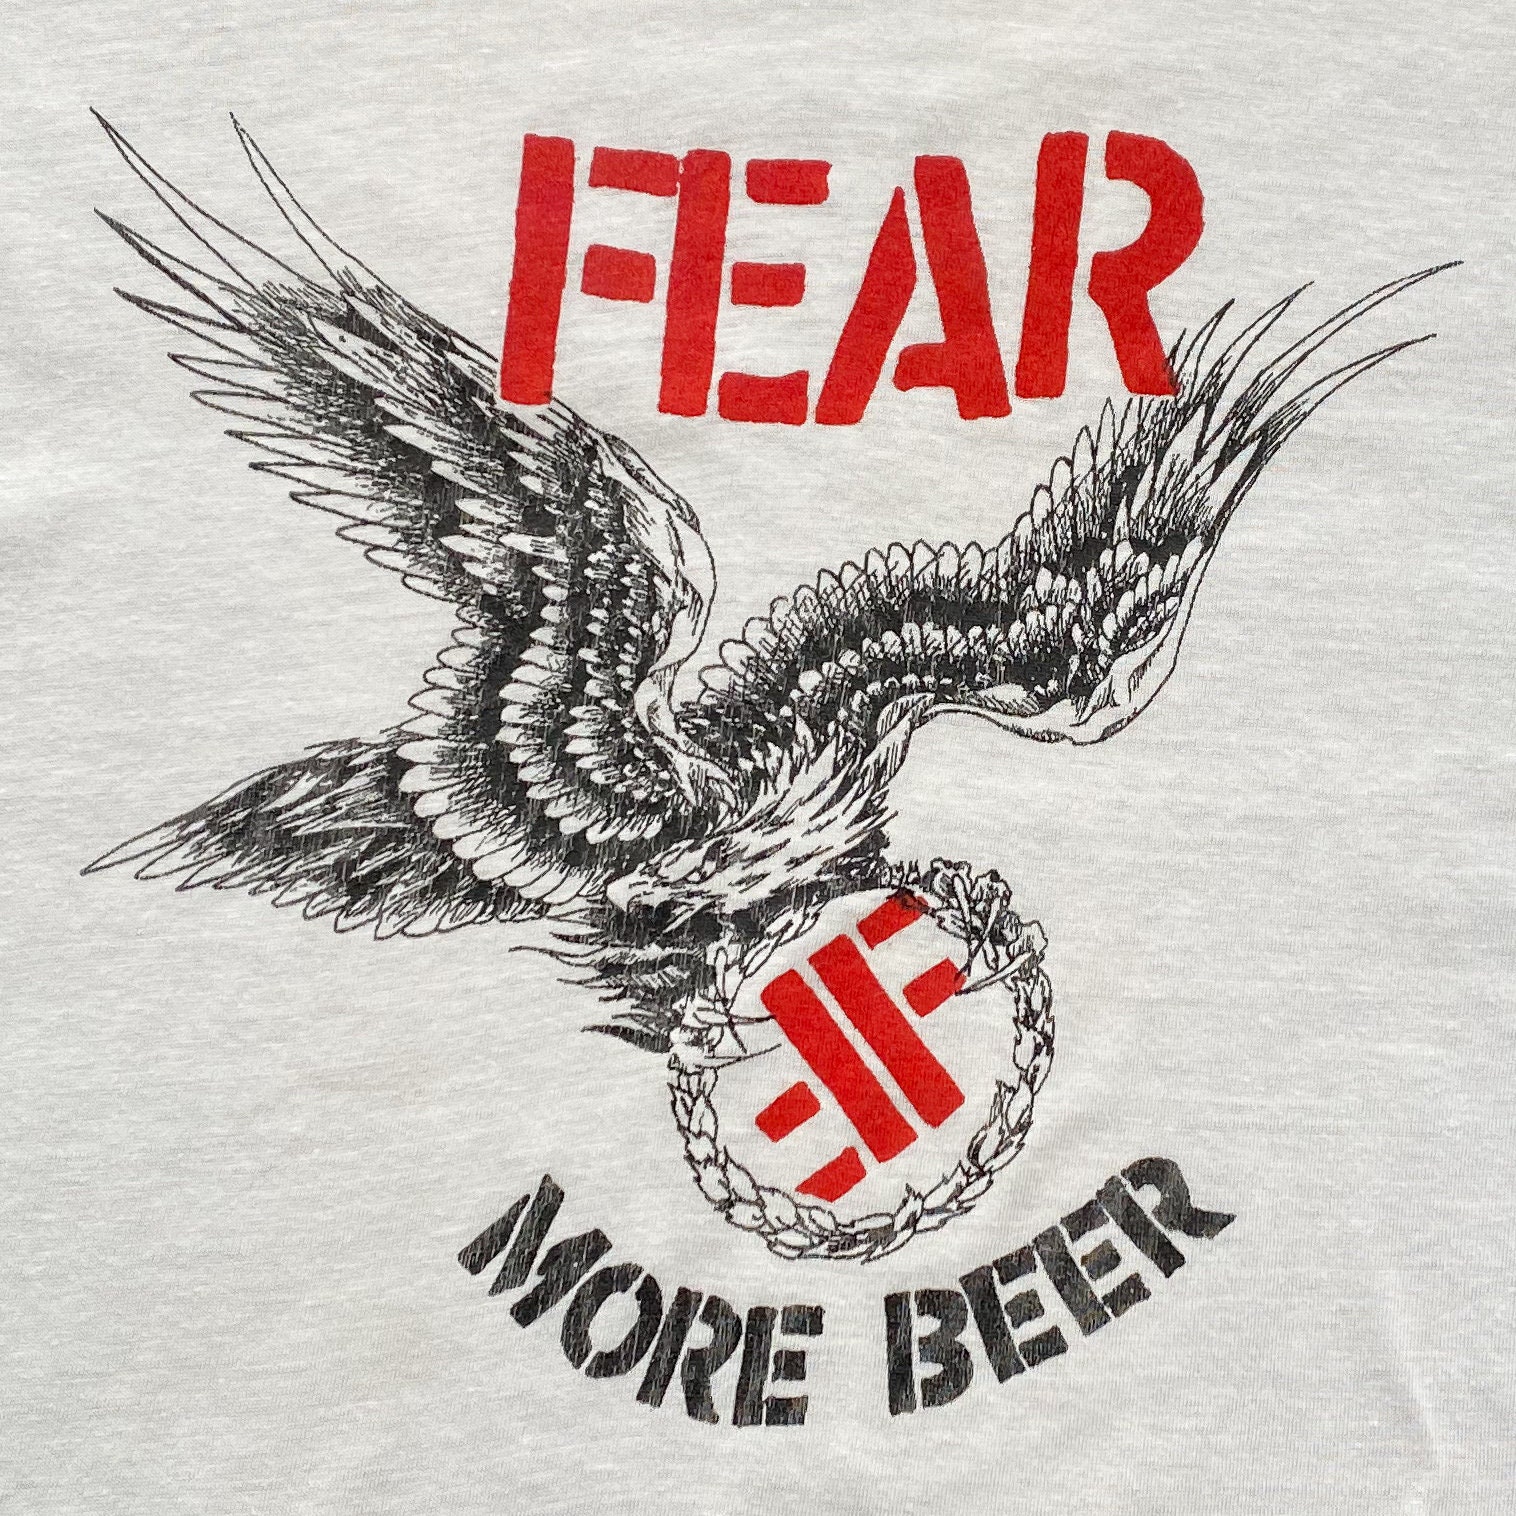 80s Fear More Beer Punk T-Shirt. 1980s Fear More Beer Graphic Punk Rock Tee